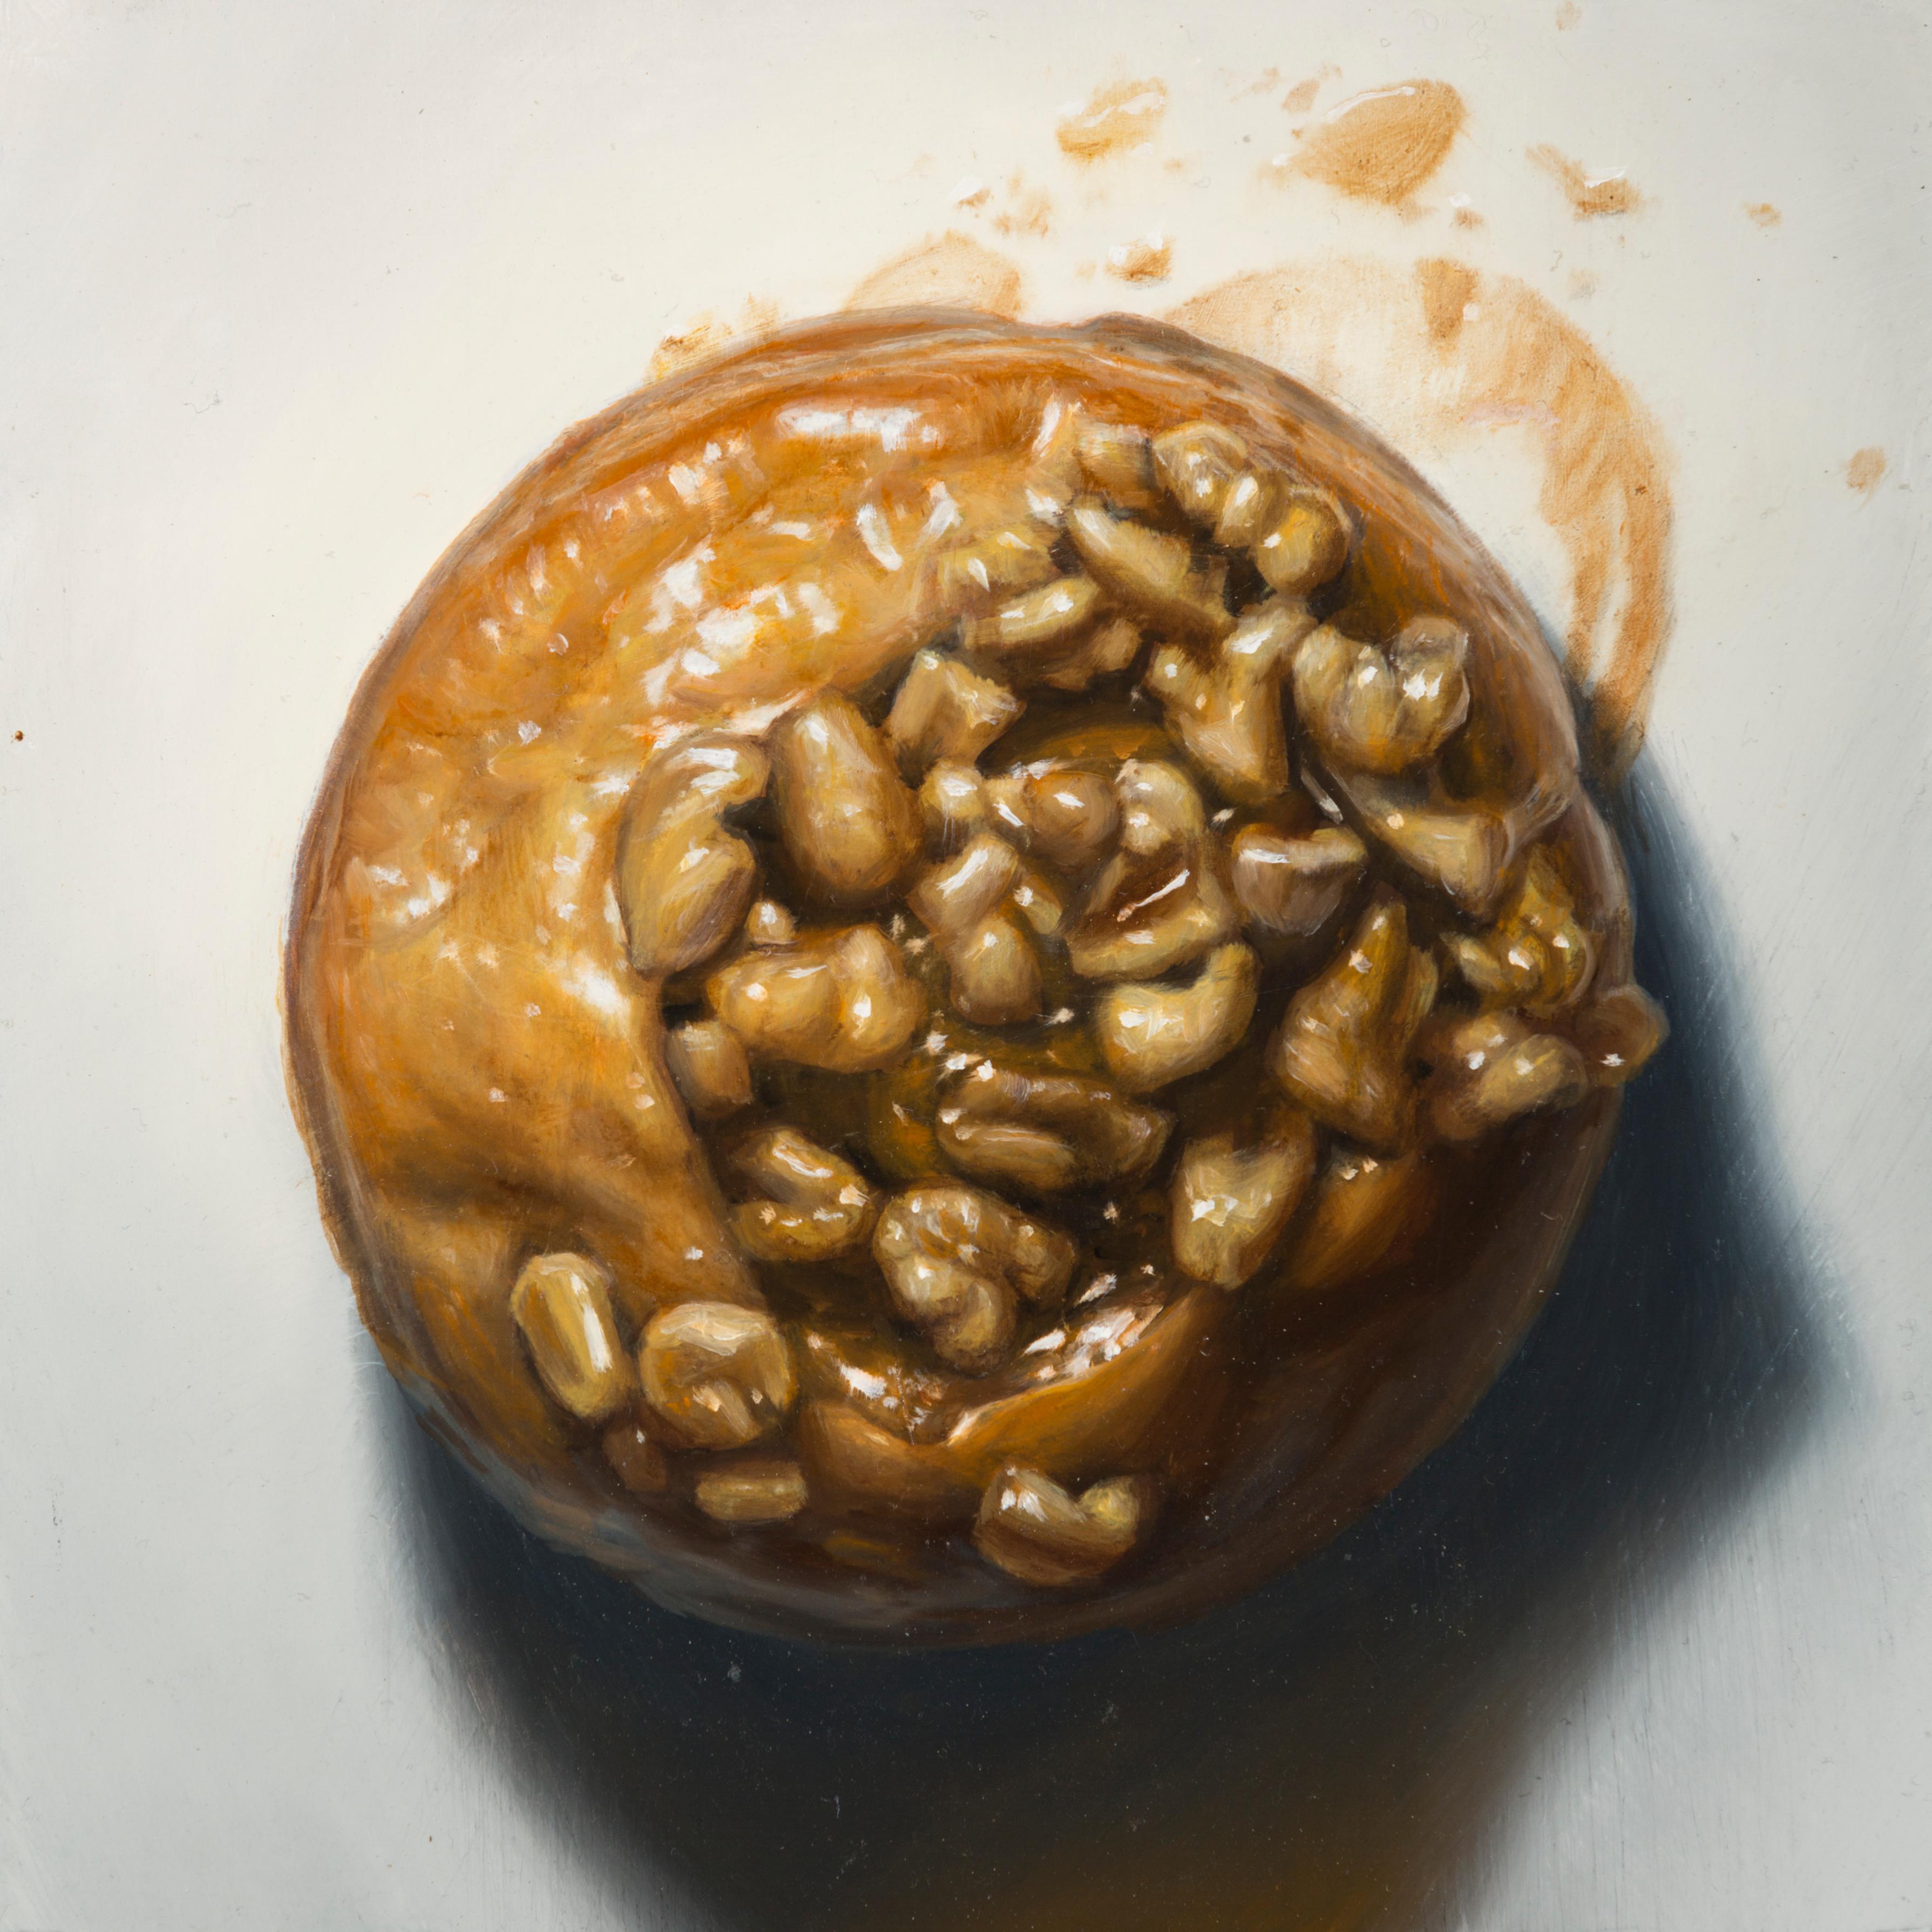 Gregory Block Still-Life Painting - "Sticky Bun" Oil Painting